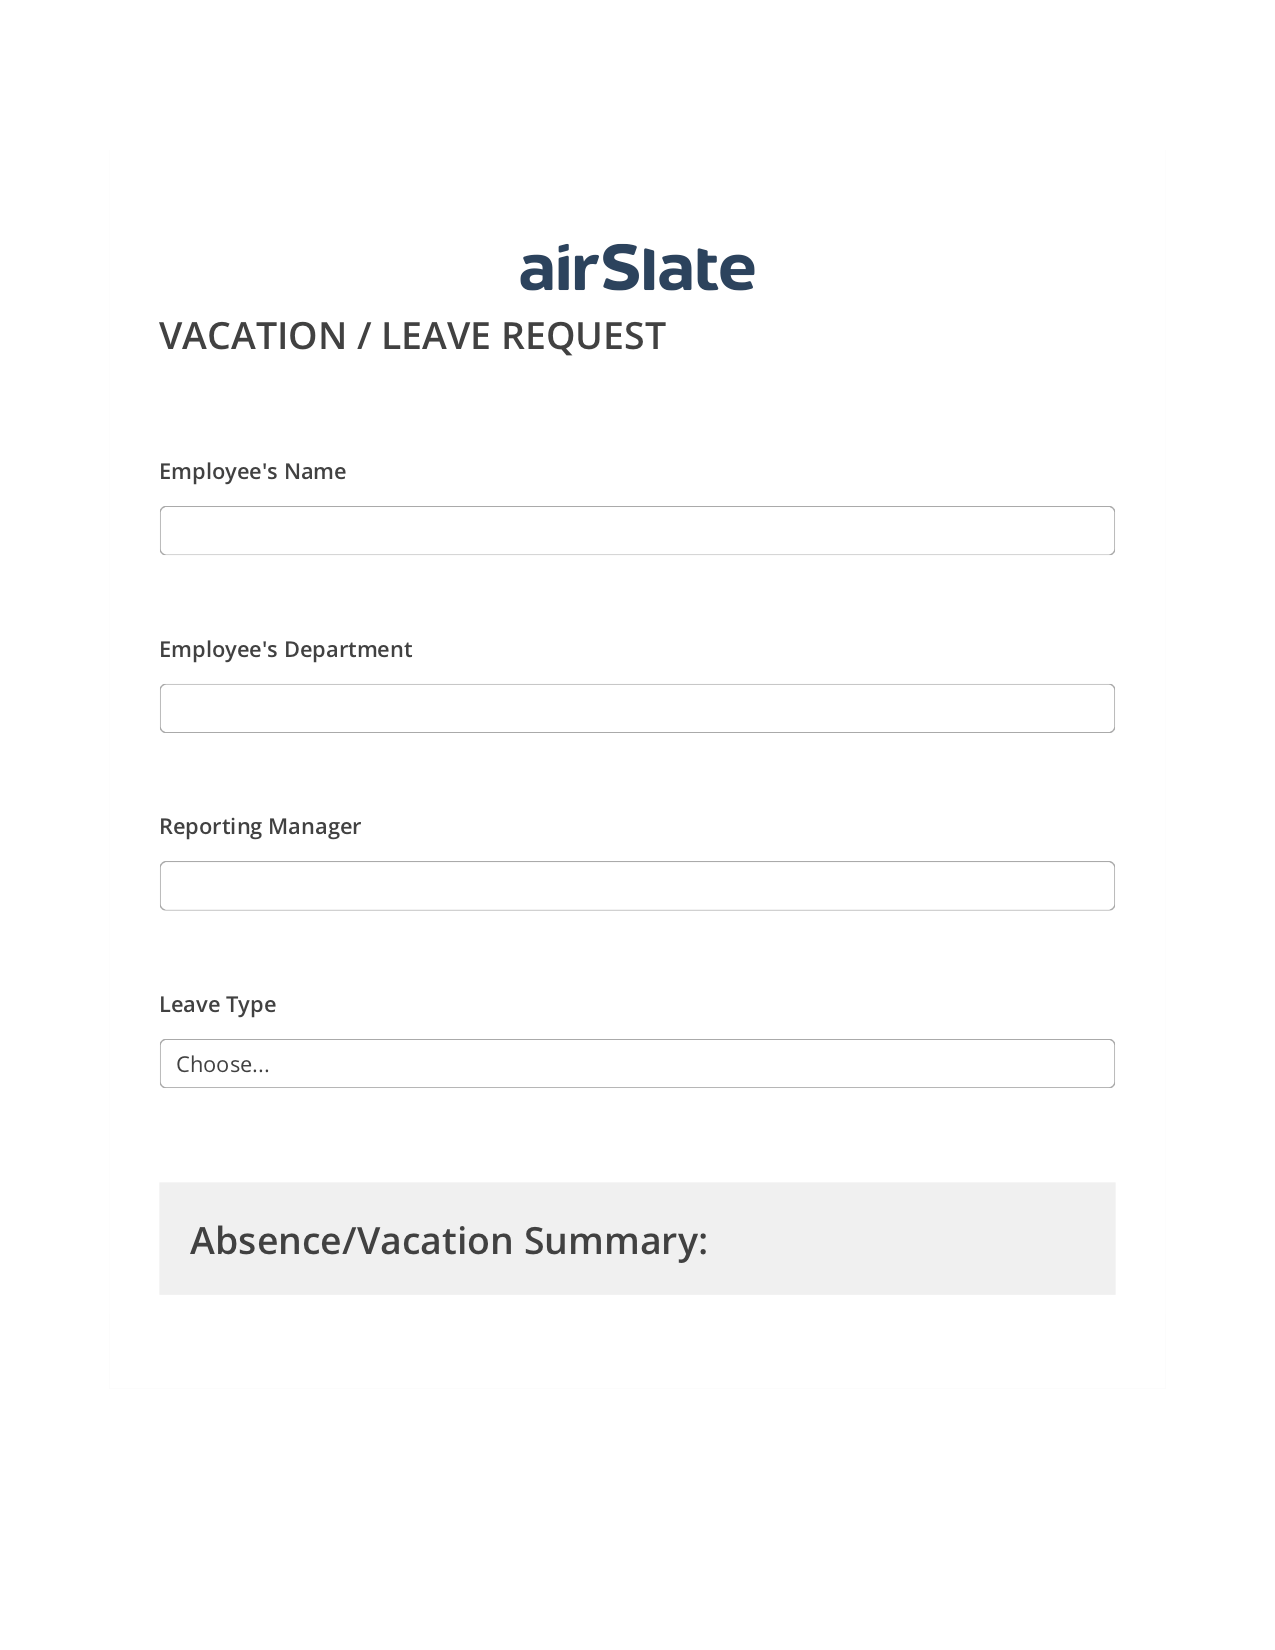 Vacation/Leave Request Workflow System Bot - Slack Two-Way Binding Bot, Send a Slate with Roles Bot, Webhook Postfinish Bot